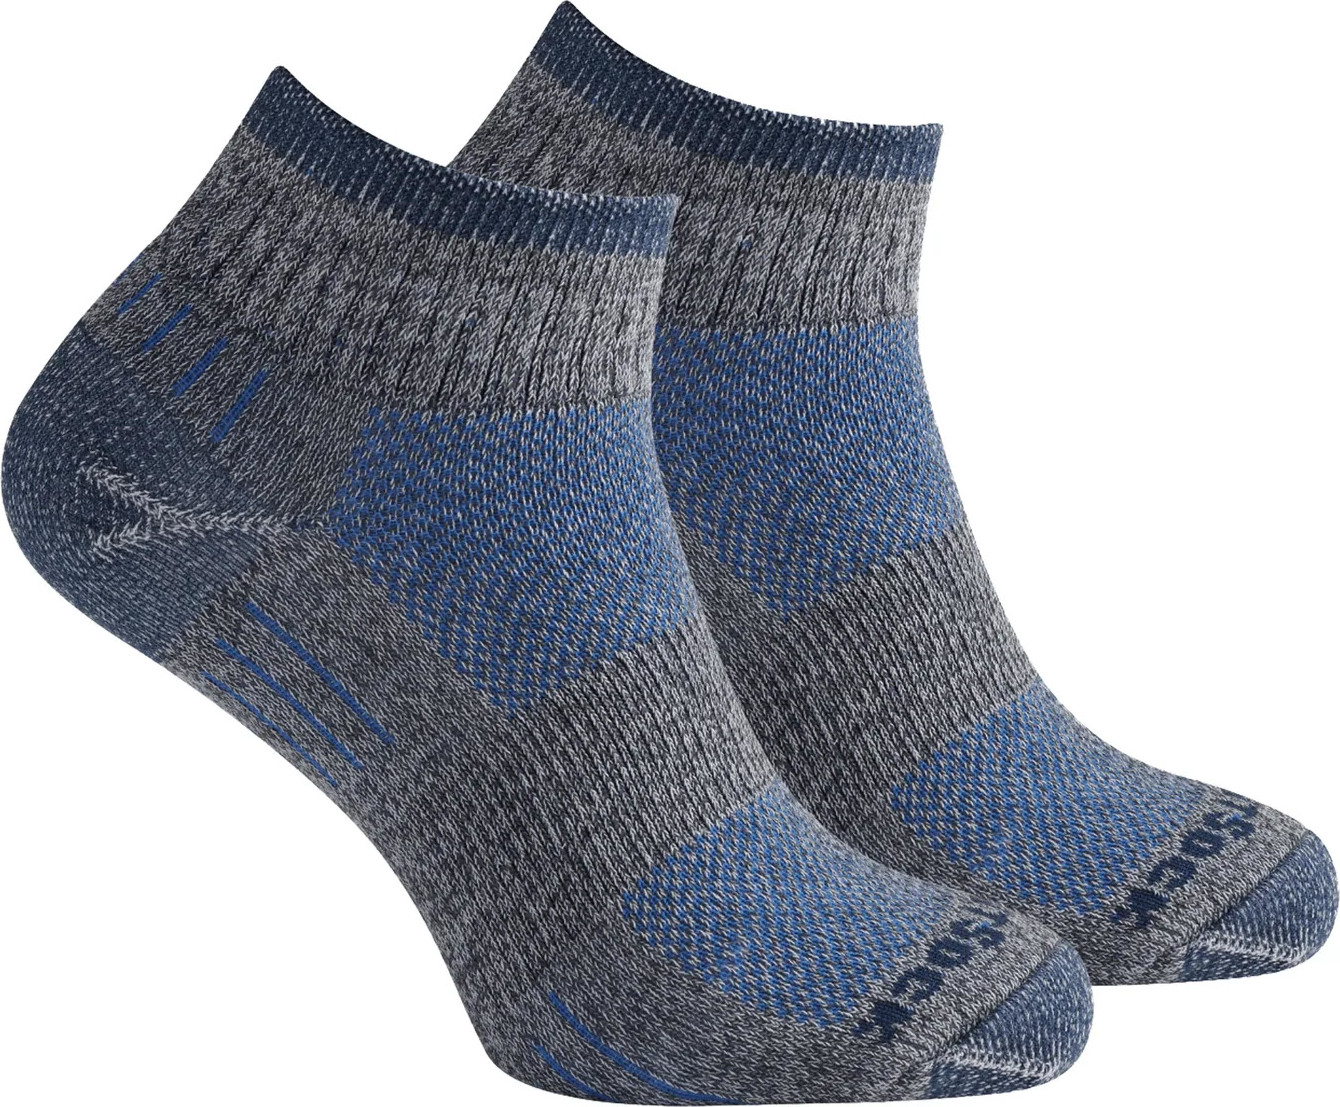 Wrightsock Escape Quater Anti Blister System Ash Twist/Blue